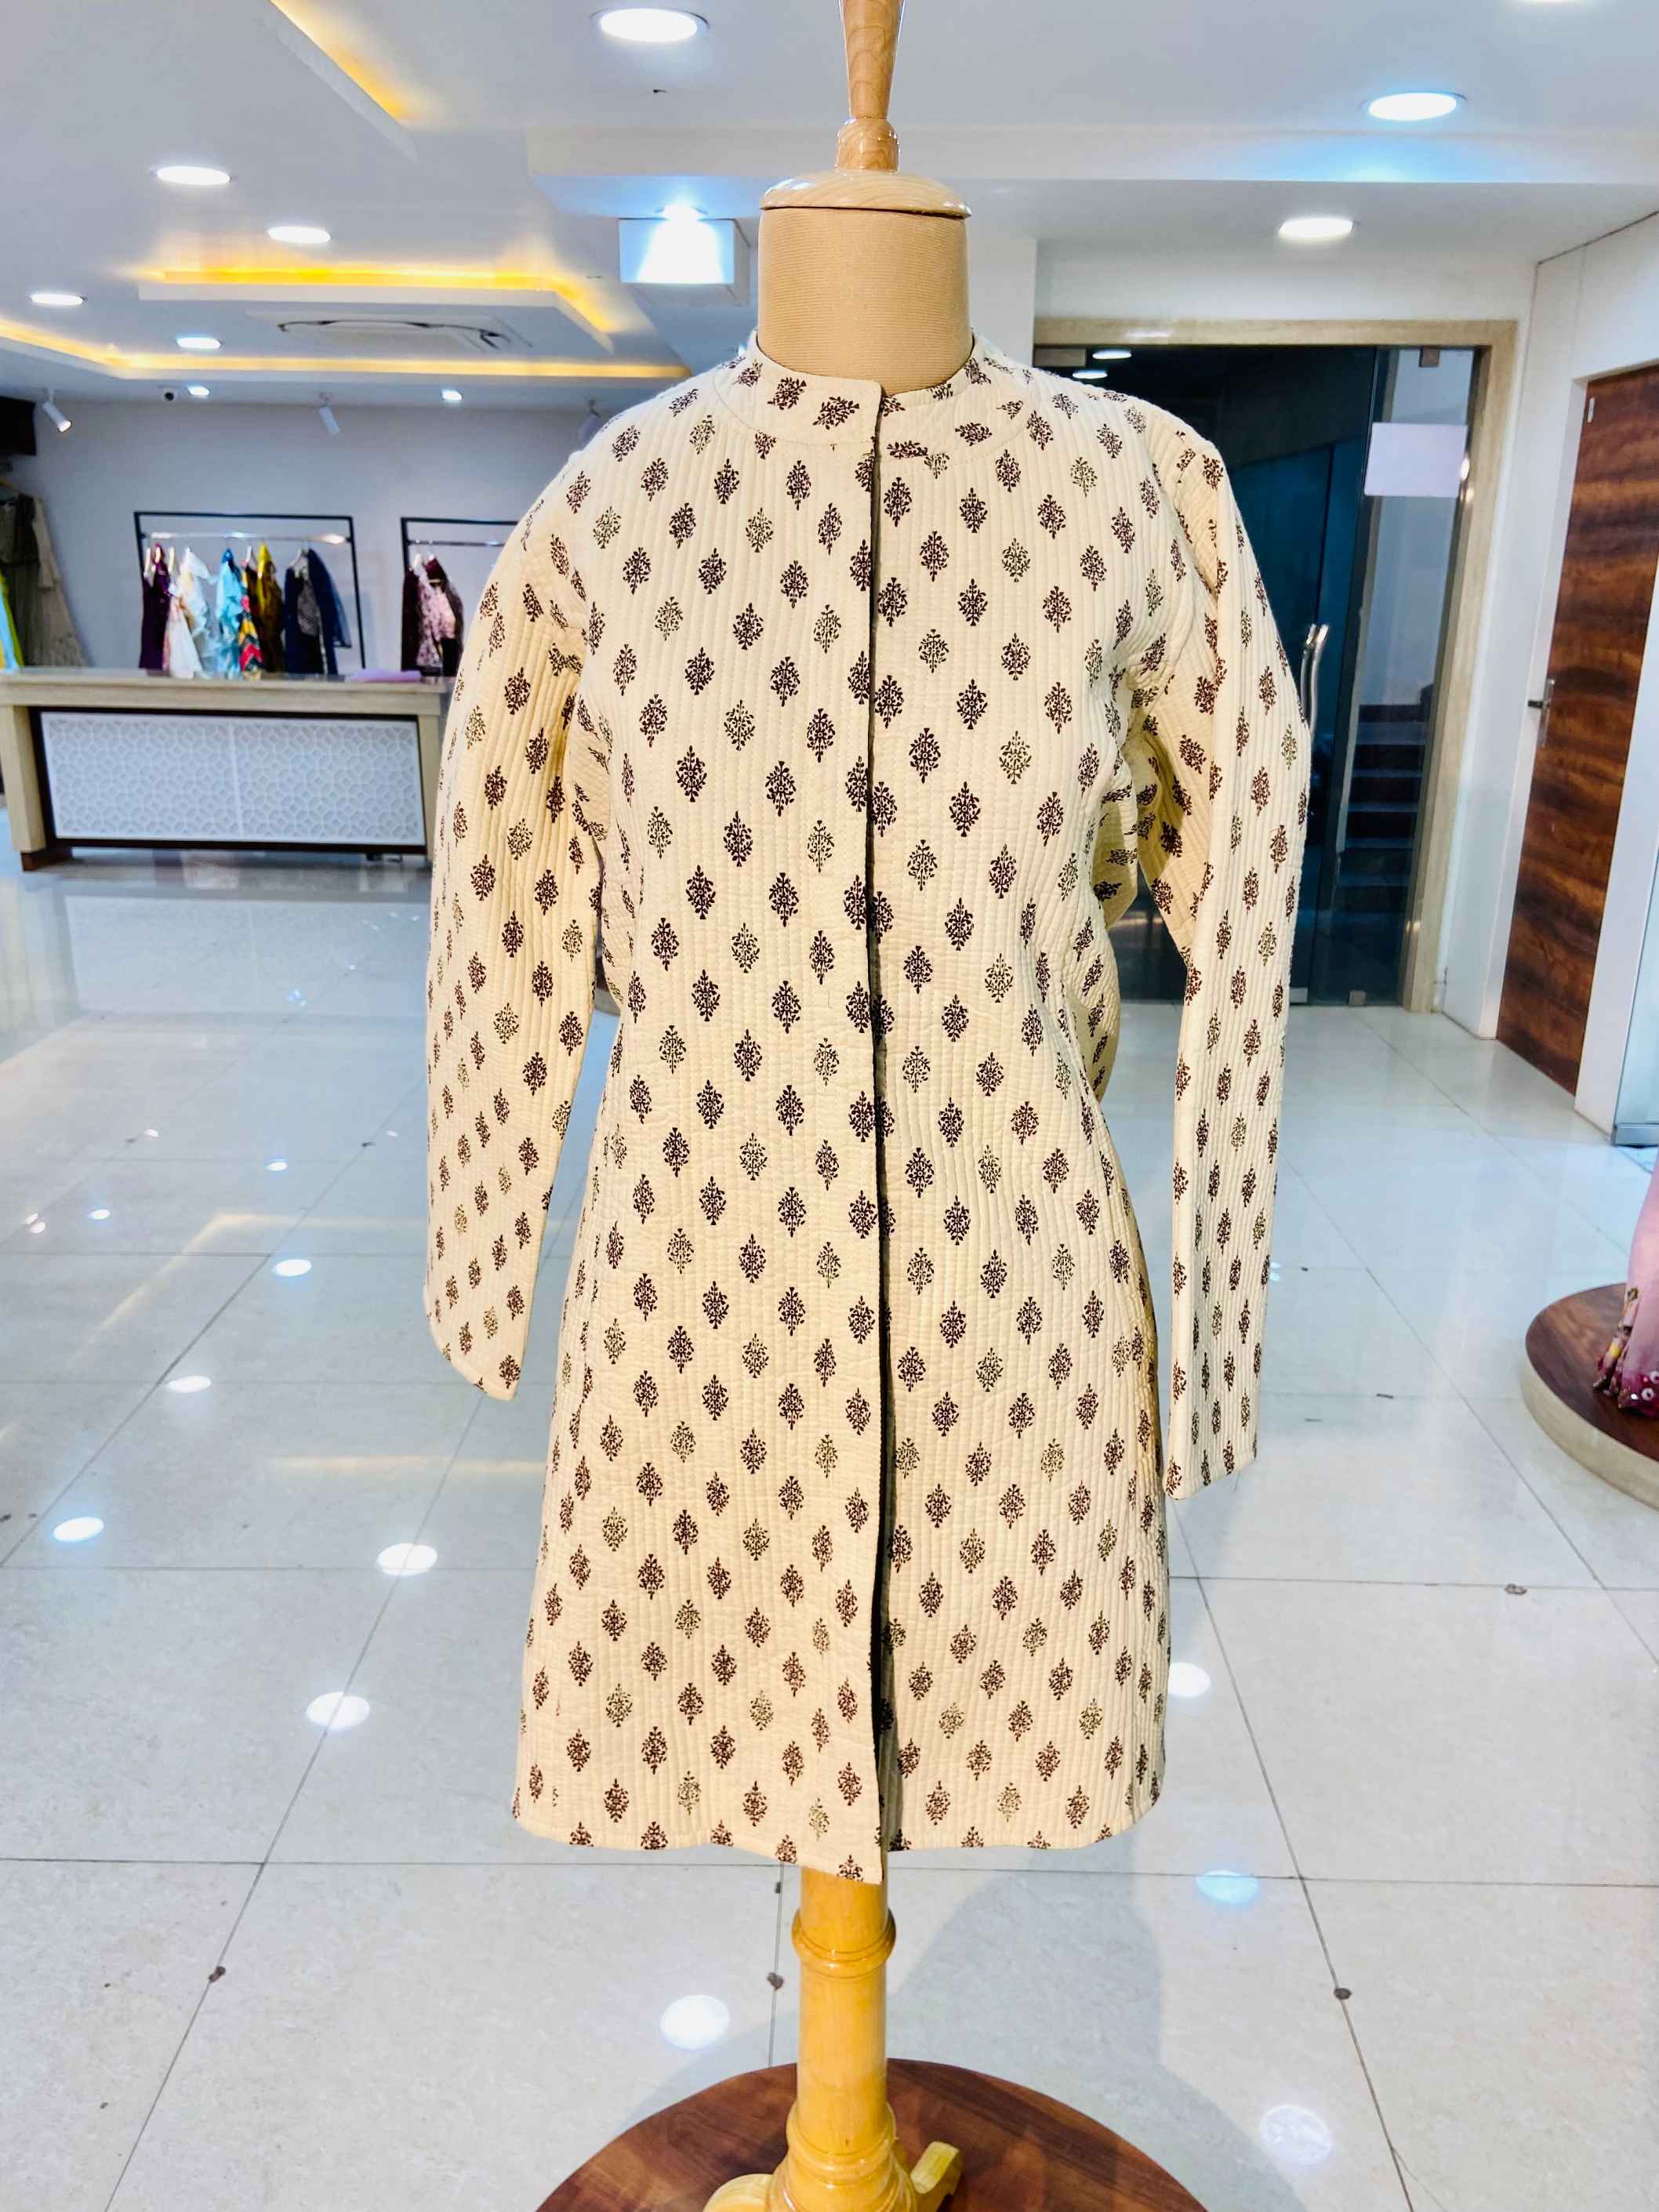 Exclusive Plain Kurti with Long Shrug Jacket at Rs.550/Piece in jaipur  offer by Aayesh Housekeeping Services